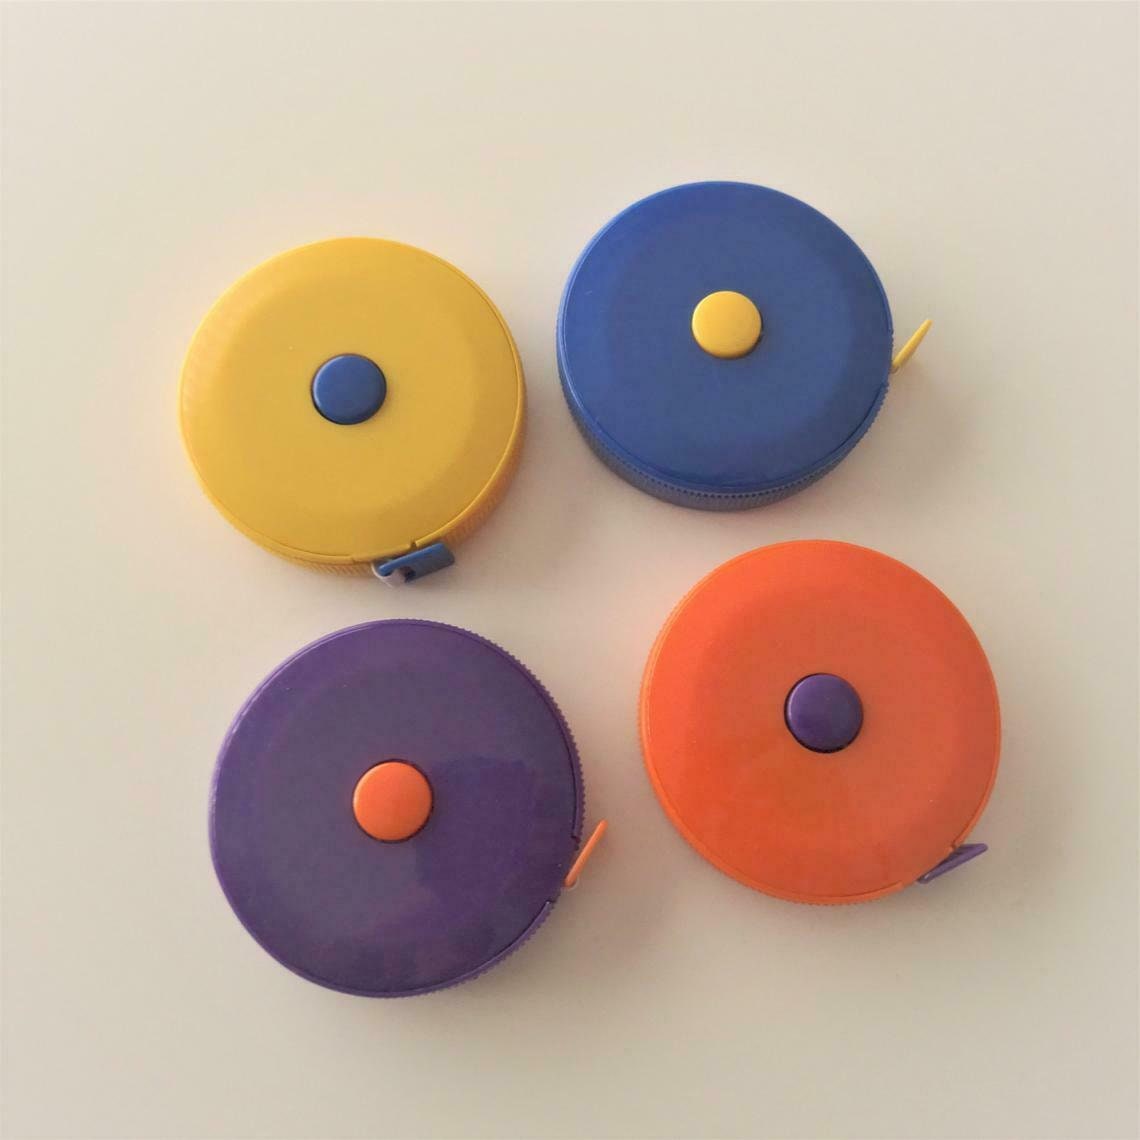 Yarn Ball/ Wool Retractable Tape Measure. Sewing, Knitting and Other  Crafts. 60 In/150 Cm. 